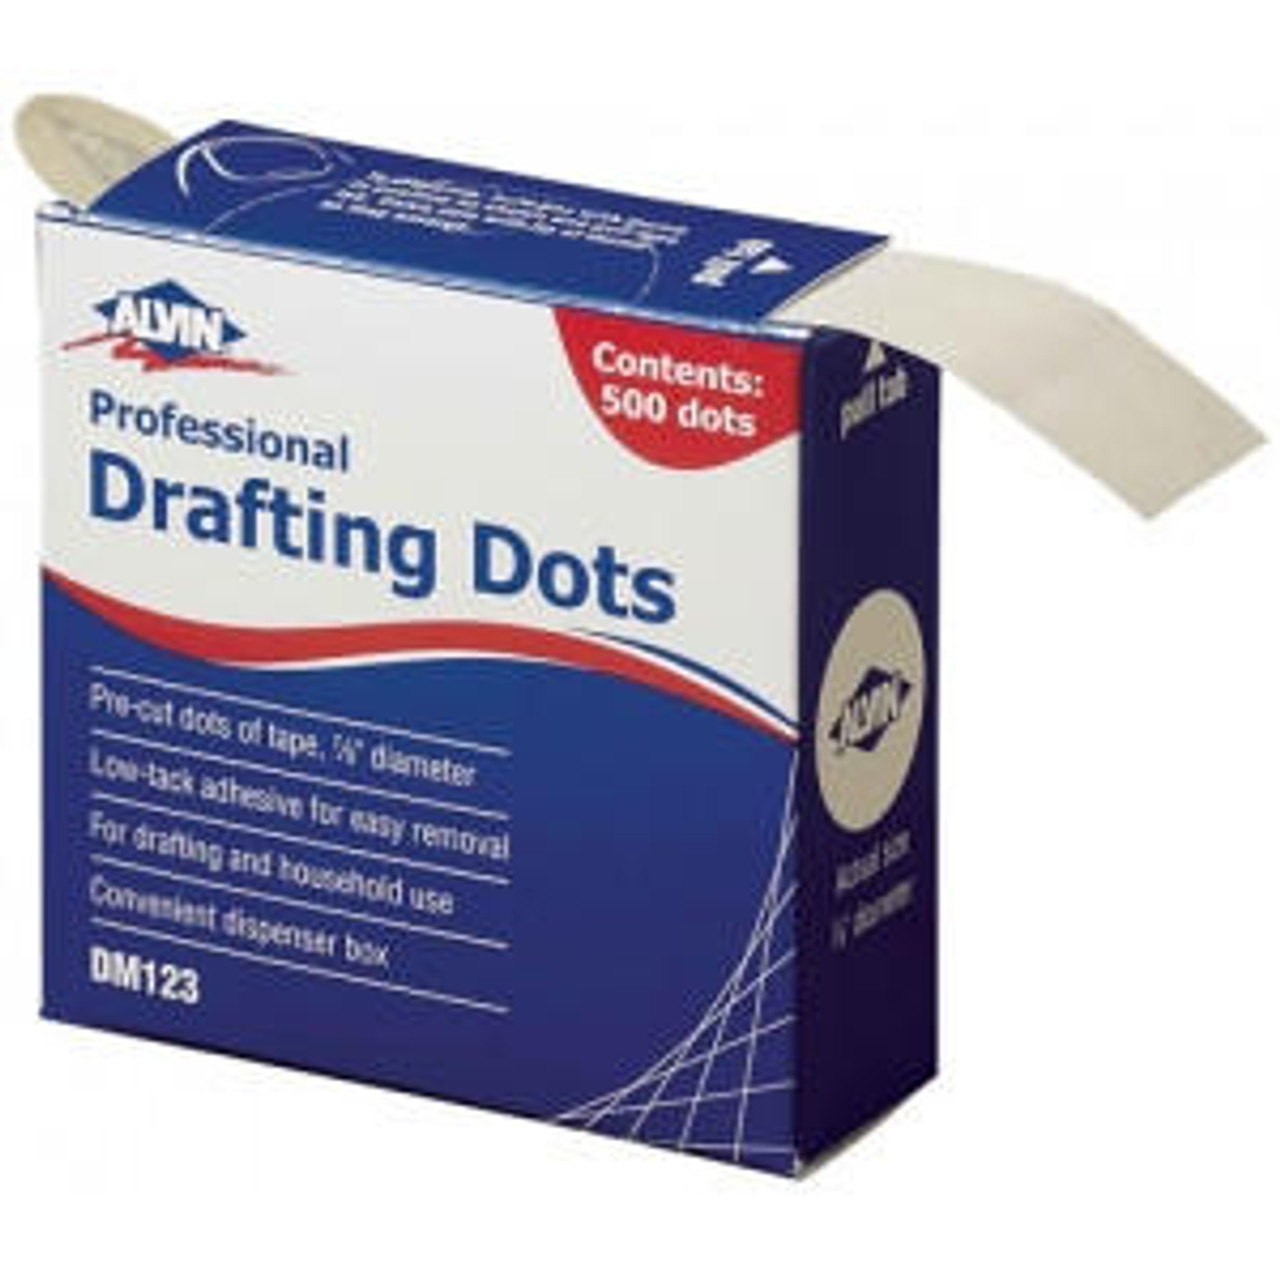 Glue Dots Repositionable Double Sided Sheets, Pack Of 5 Cut To Size Sheets